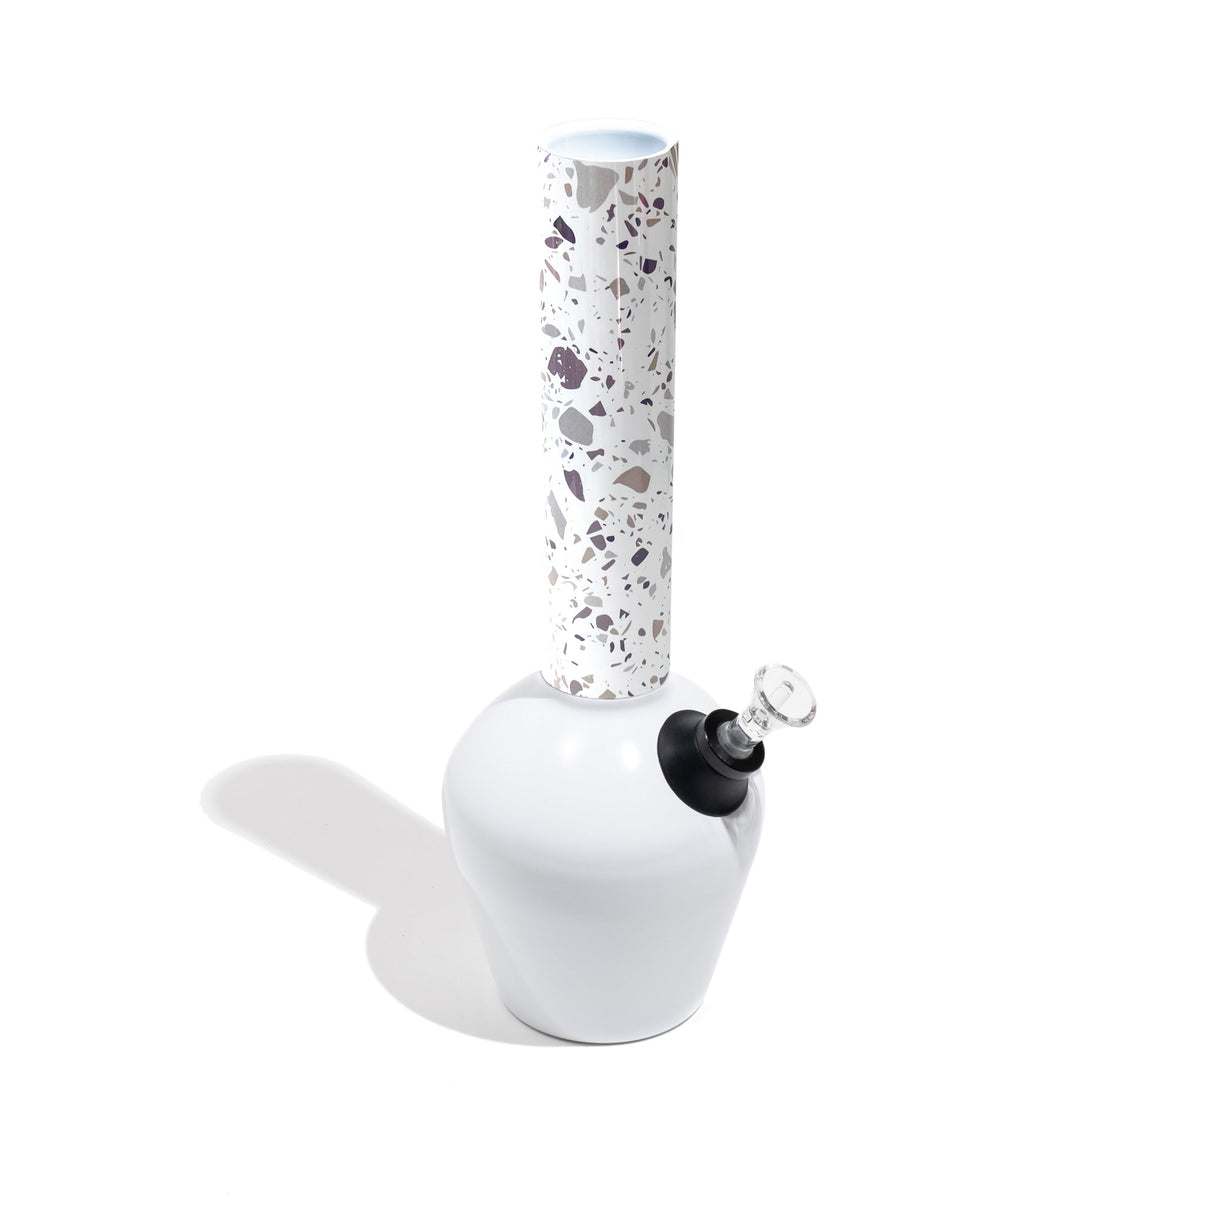 Chill Mix & Match Series - Gloss White Base with Terrazzo Neck Design, Angled View